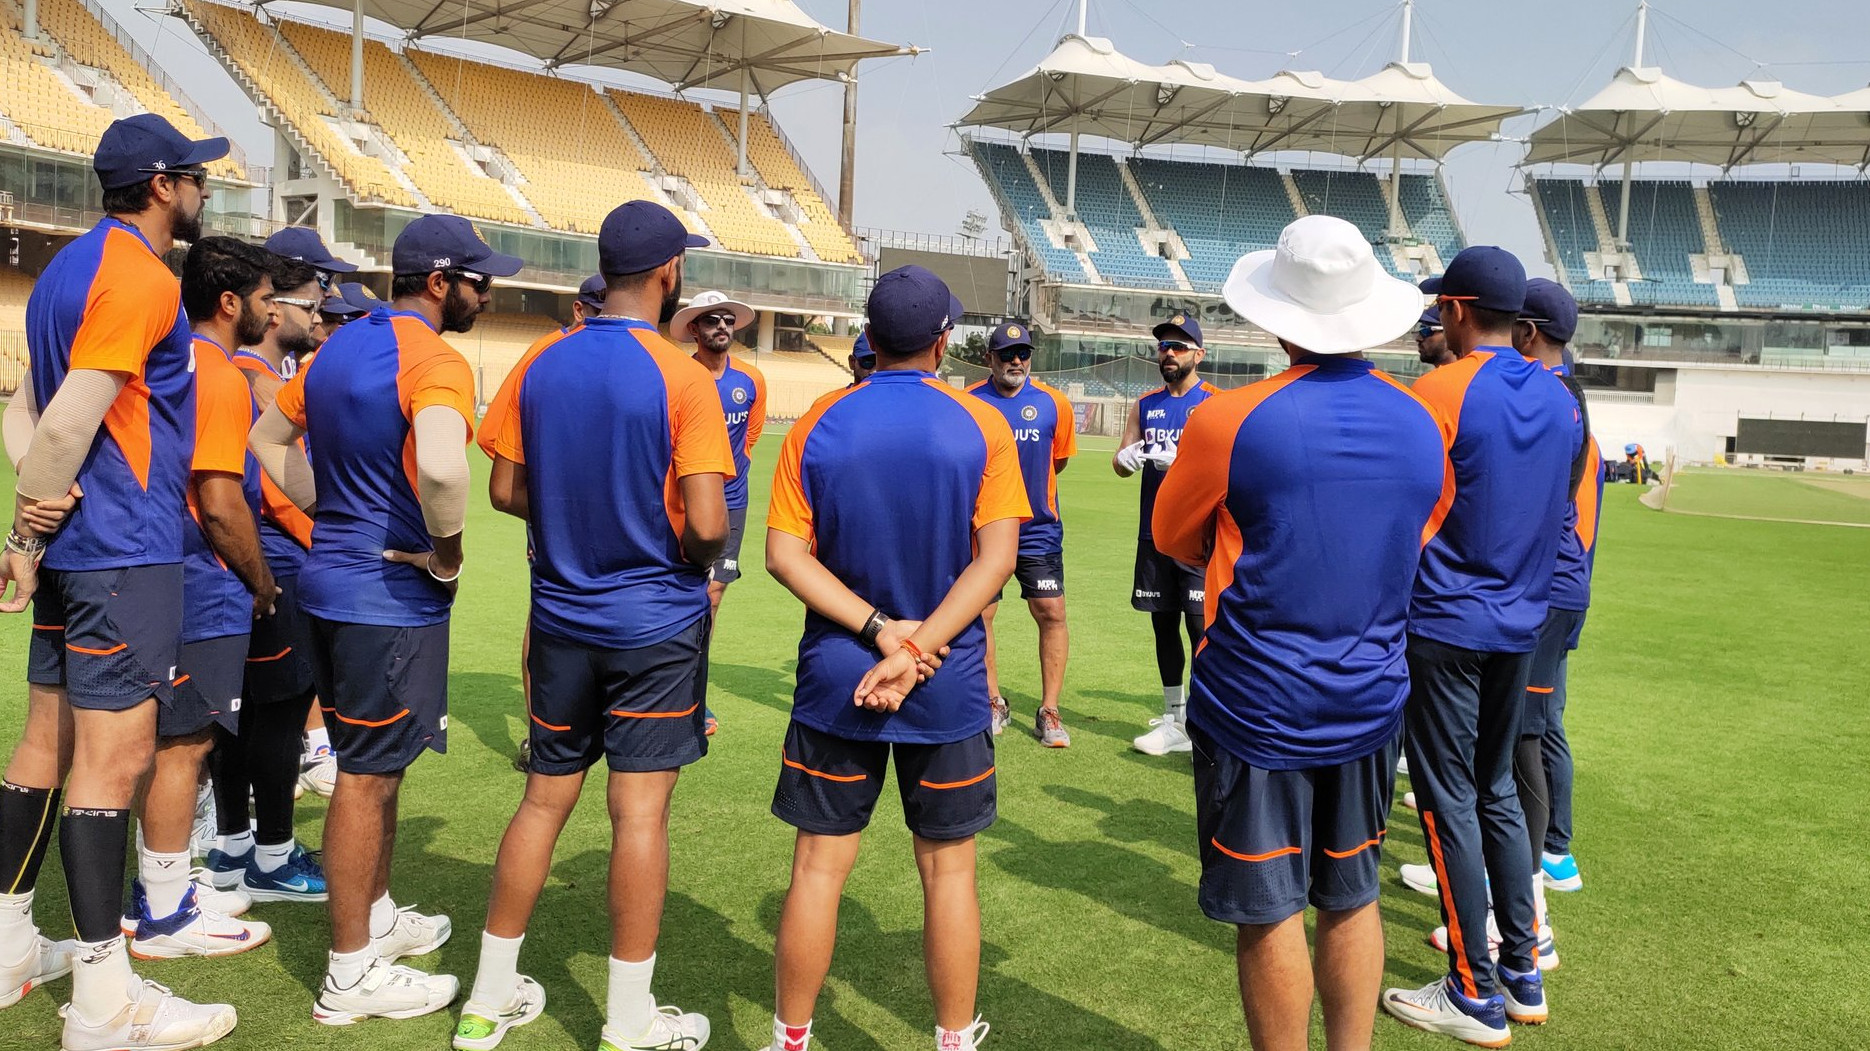 IND v ENG 2021: Virat Kohli says “Indian team had a 'brief discussion' over farmers' protest”